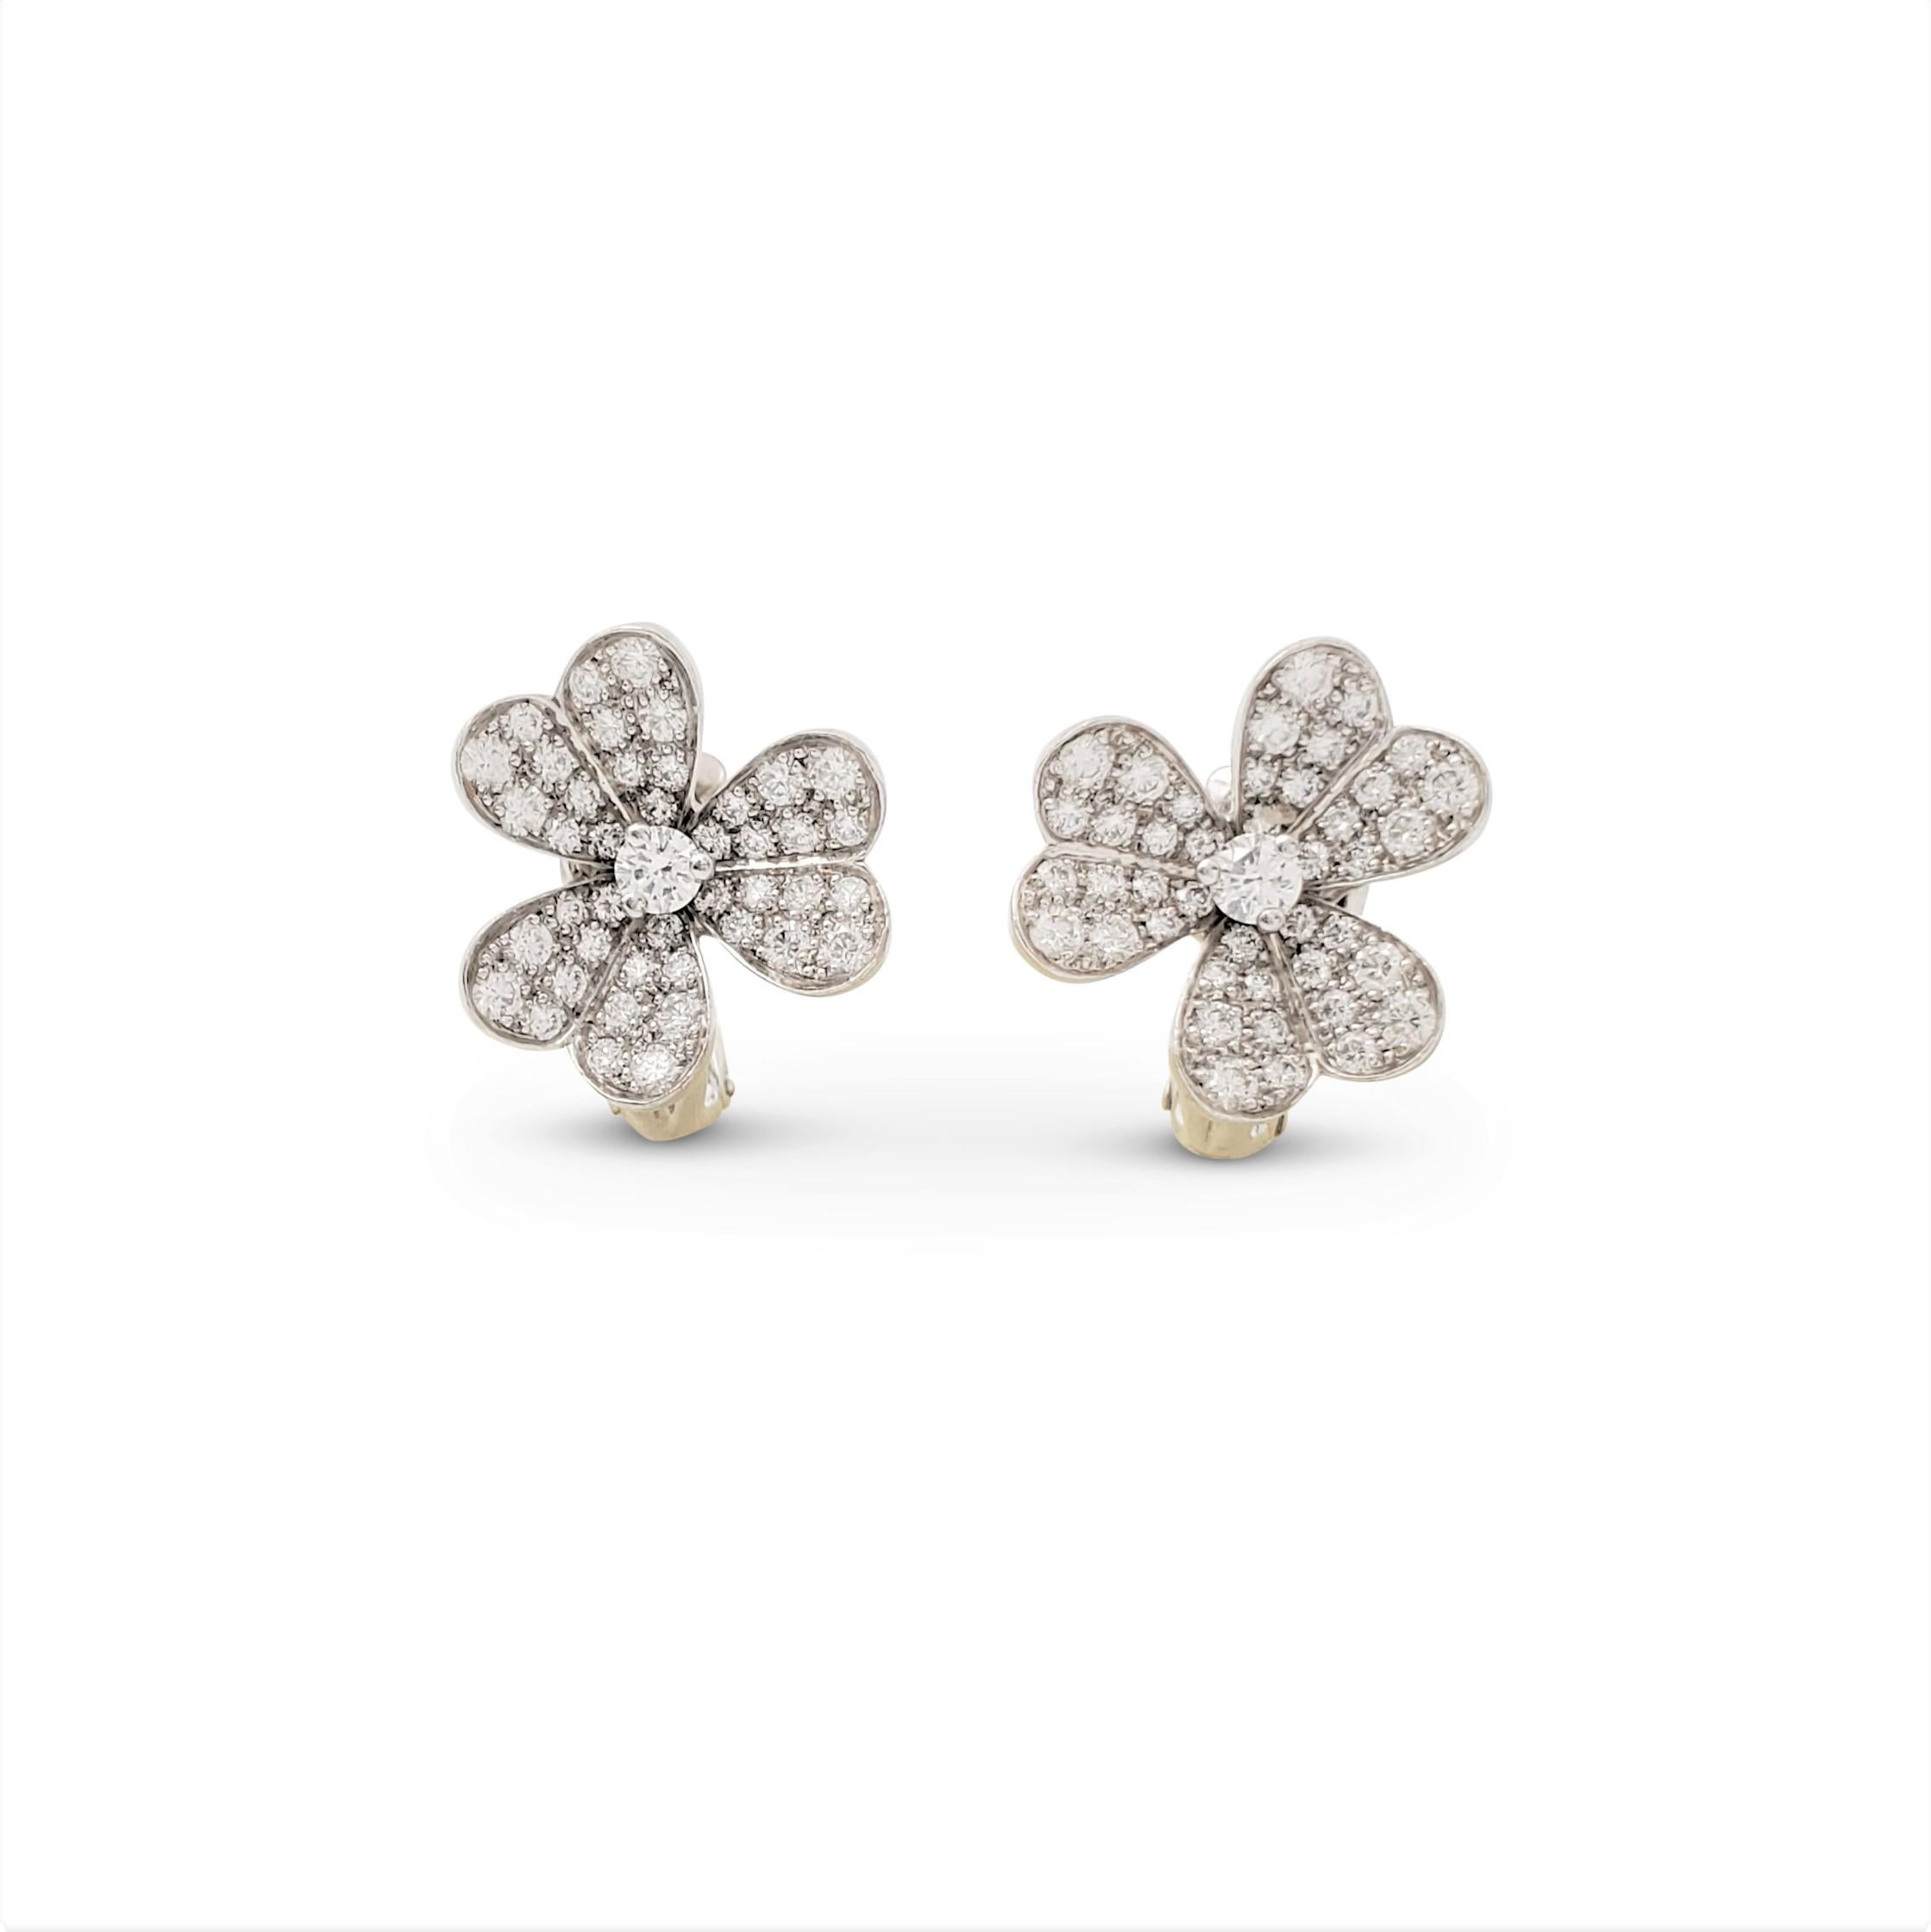 Authentic Van Cleef & Arpels 'Frivole' earrings feature 18 karat white gold heart-shaped petals set with sparkling round brilliant cut diamonds weighing a total of 1.61 carats total weight (E-F color, VS clarity). Signed VCA, Au750, with serial